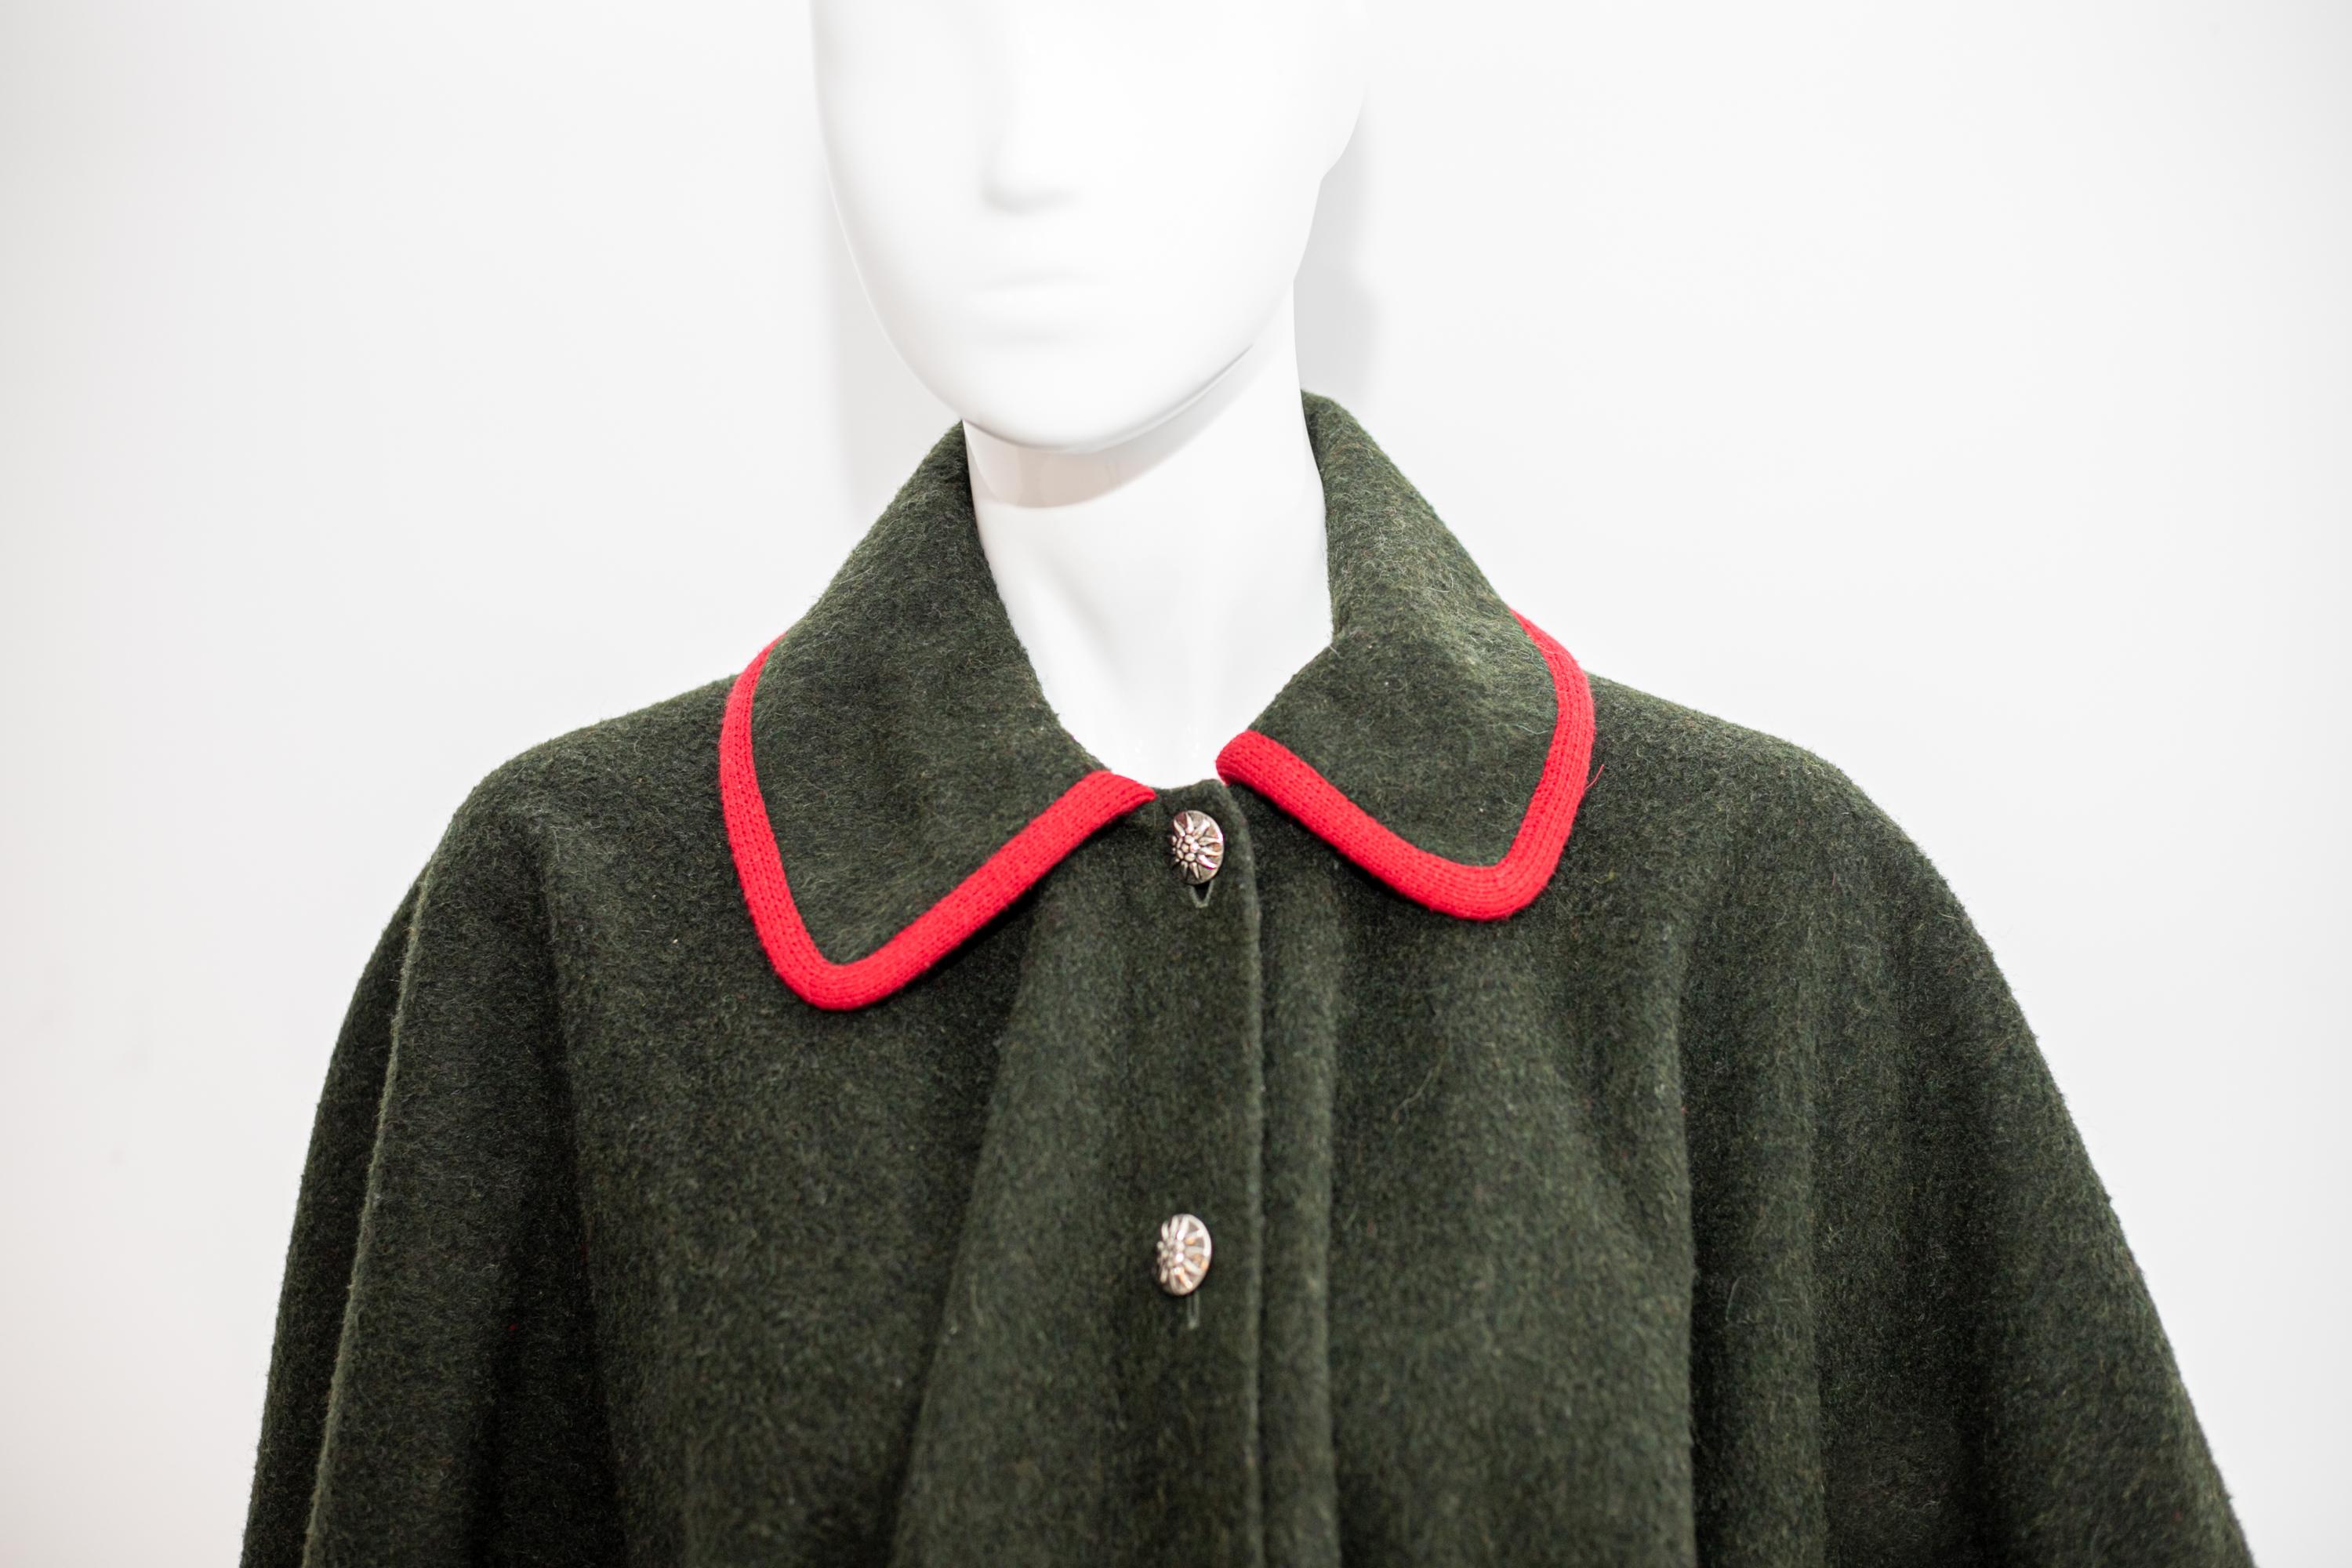 Gorgeous and elegant vintage wool cape designed in the 1990s, made in Italy.
The cape is very simple, but impactful. It is entirely made of green wool, its length reaches the knees.
The sleeves extend to the wrists, very wide, typical of a cape.
The